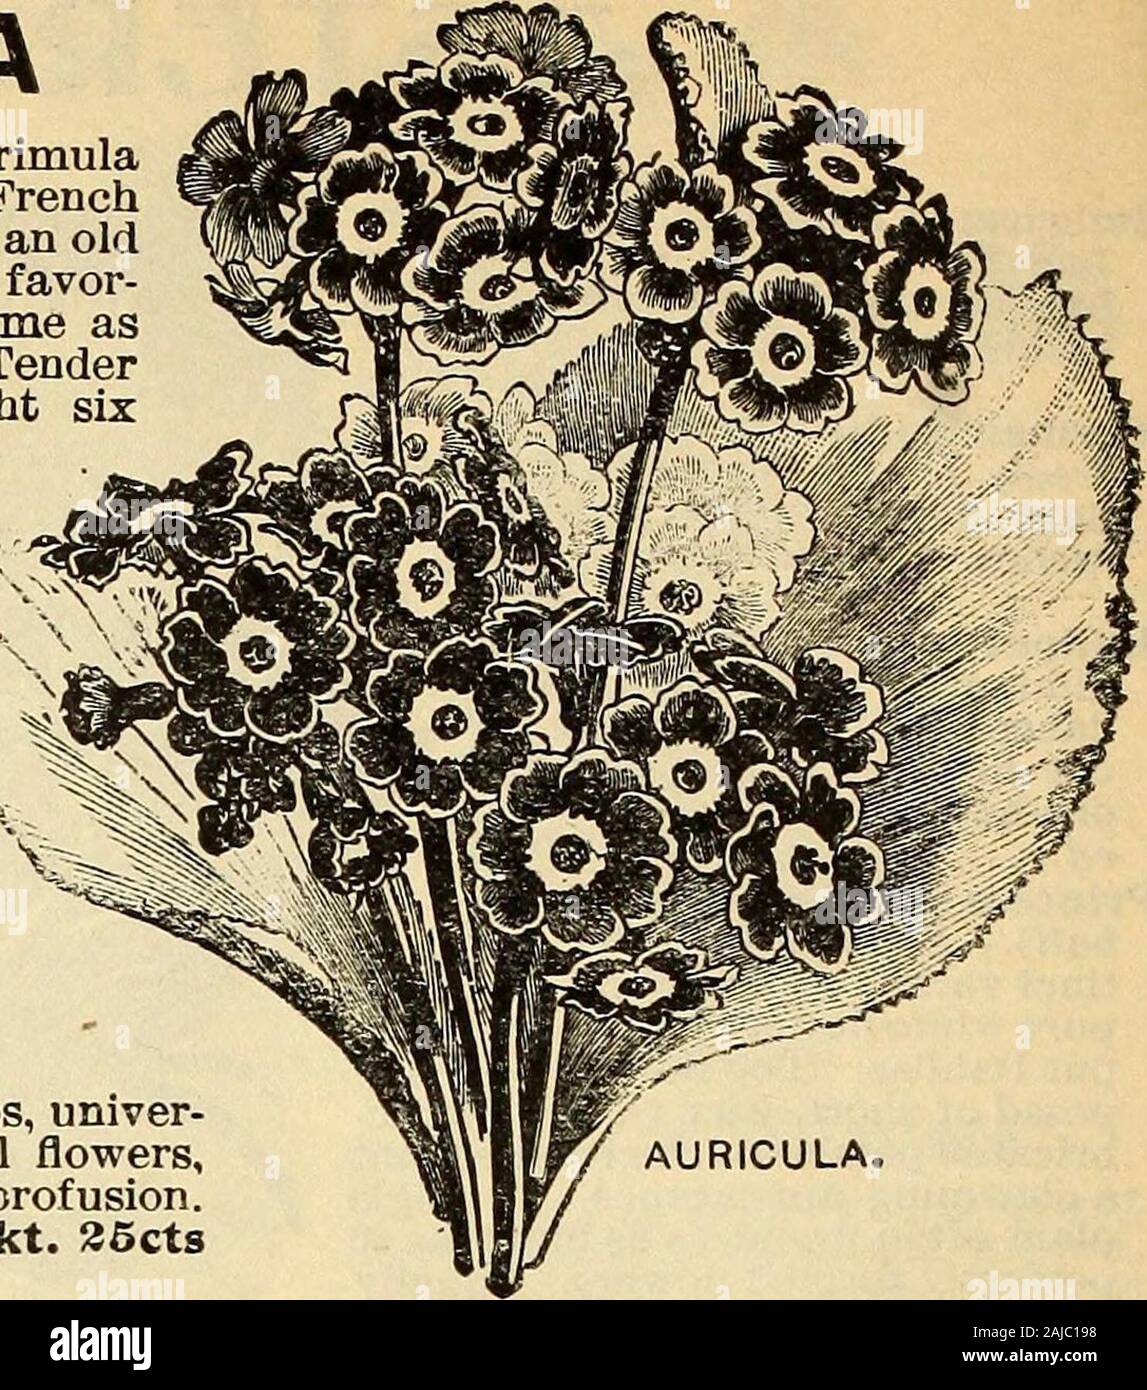 Seed annual . Auricula ^* Called also Primula Auricula and FrenchCowslip. This is an oldand well-known favor-ite. Culture same asfor Primrose. Tenderperennial; height sixinches. Alpine, the most hardy variety Pkt. ISctsi Finest Prize, ? mixture of all the choicest  varieties Pkt. 20cts AZALEA INDICA Spring flowering shrubs, univer-sally admired for their beautiful flowers,which are produced in great profusion.Finest mixed Pkt. S5cts BAi^sAM s:he Rachelors button.., been so greatly im- • ^ {Centaurea Cyanus). proved by cultivation ^^ mv,- • ti, -^ ithat with proper treatment and good seed, a Stock Photo